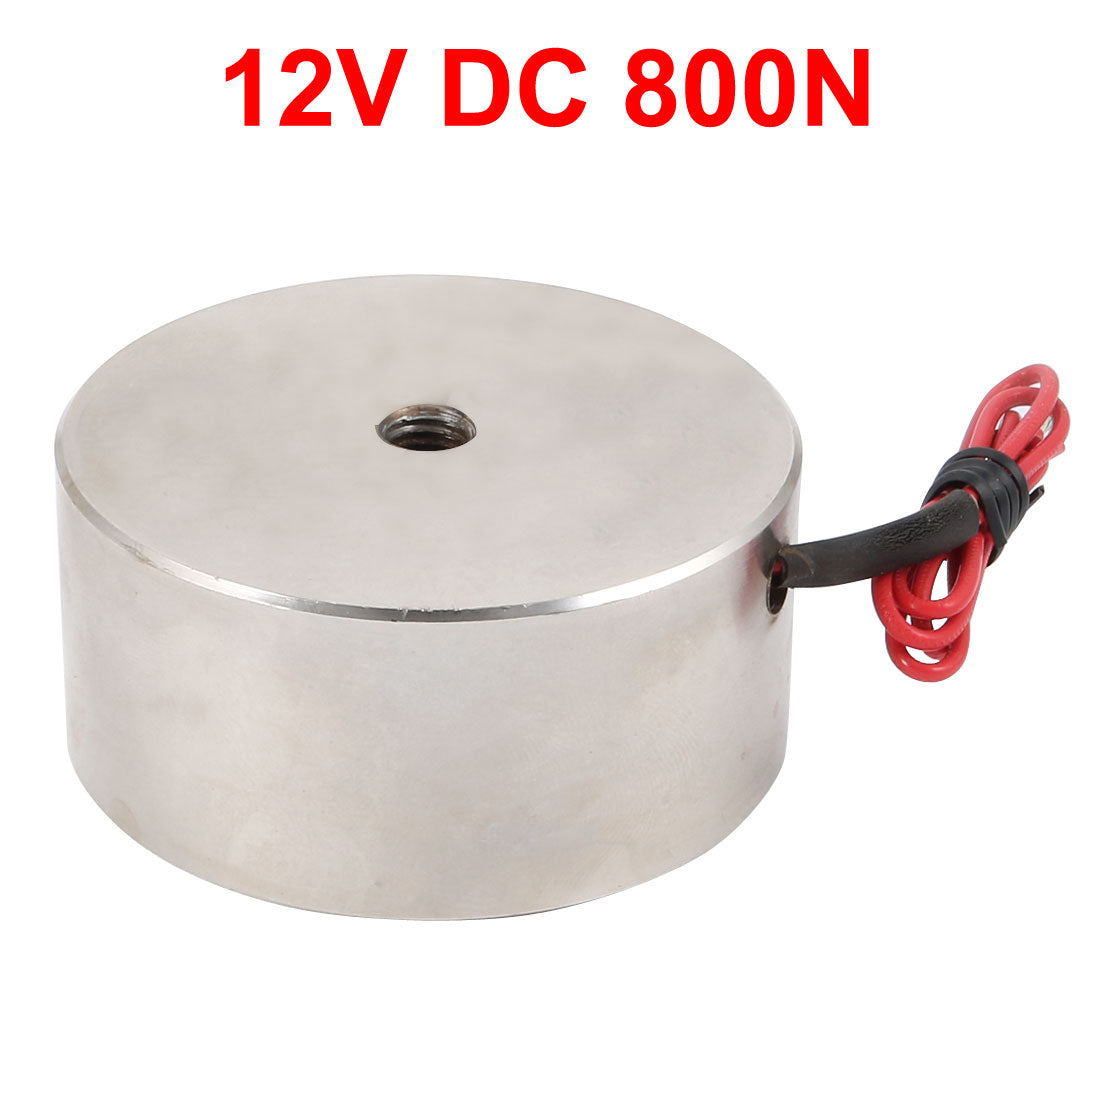 uxcell Uxcell 12V DC 800N Electric Lifting Magnet Electromagnet Solenoid Lift Holding